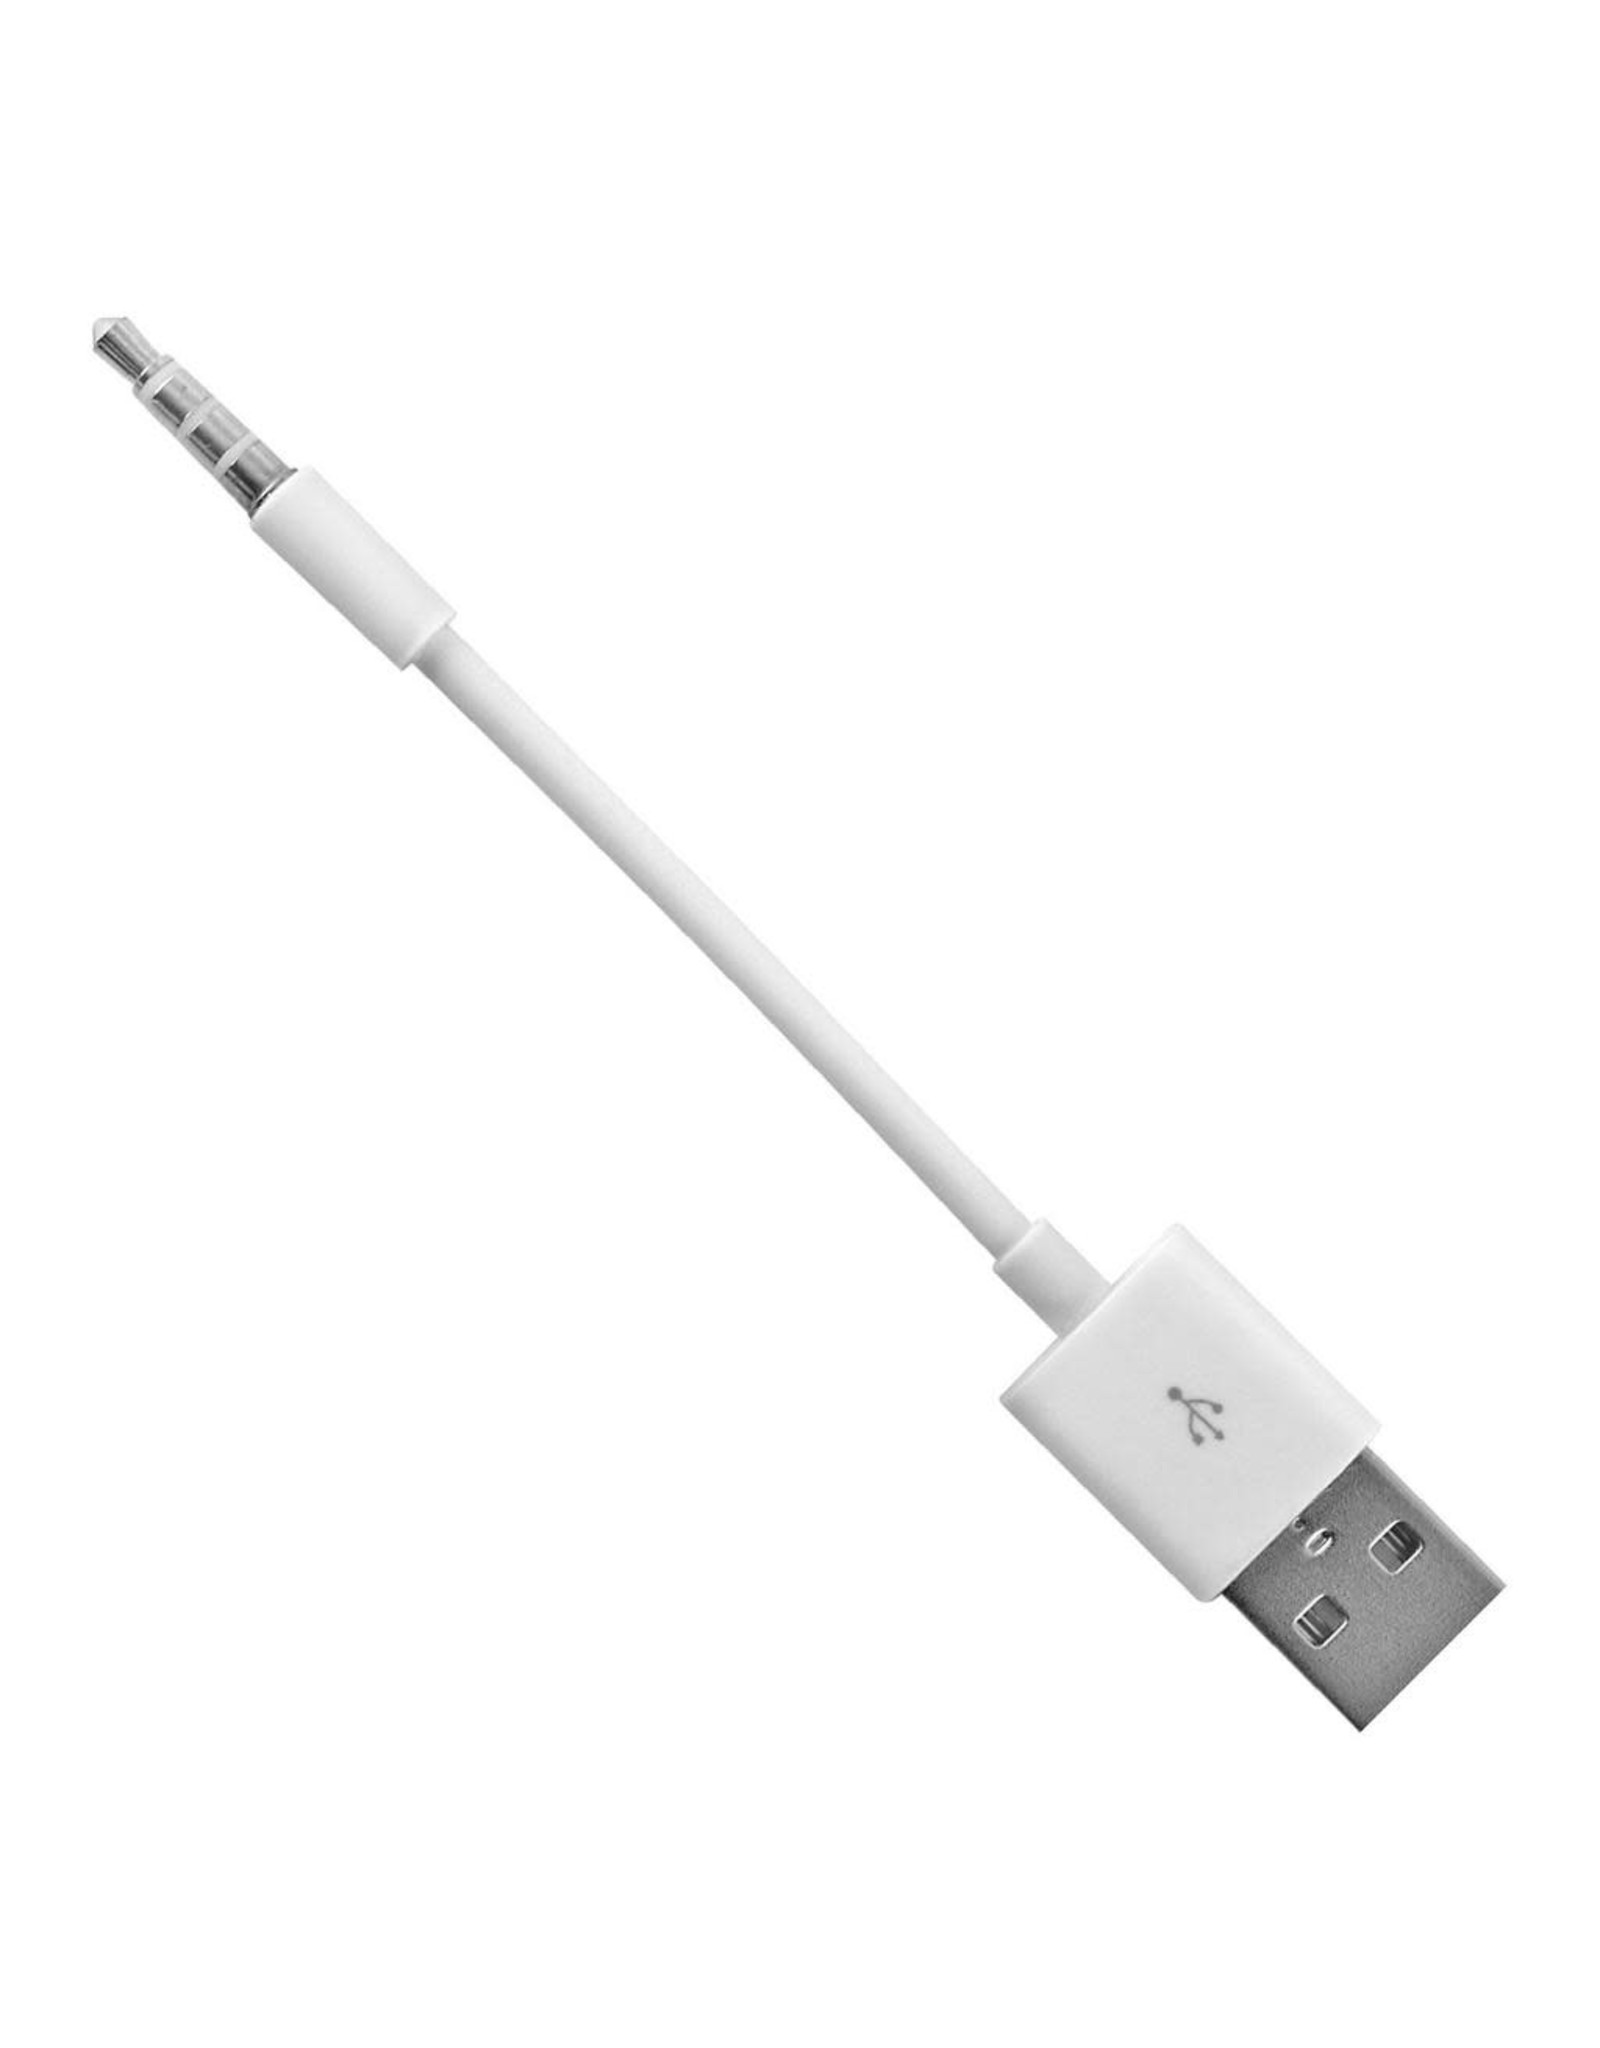 Radtech Radtech - ProCable Charge/Sync for iPod shuffle 2-4G - White